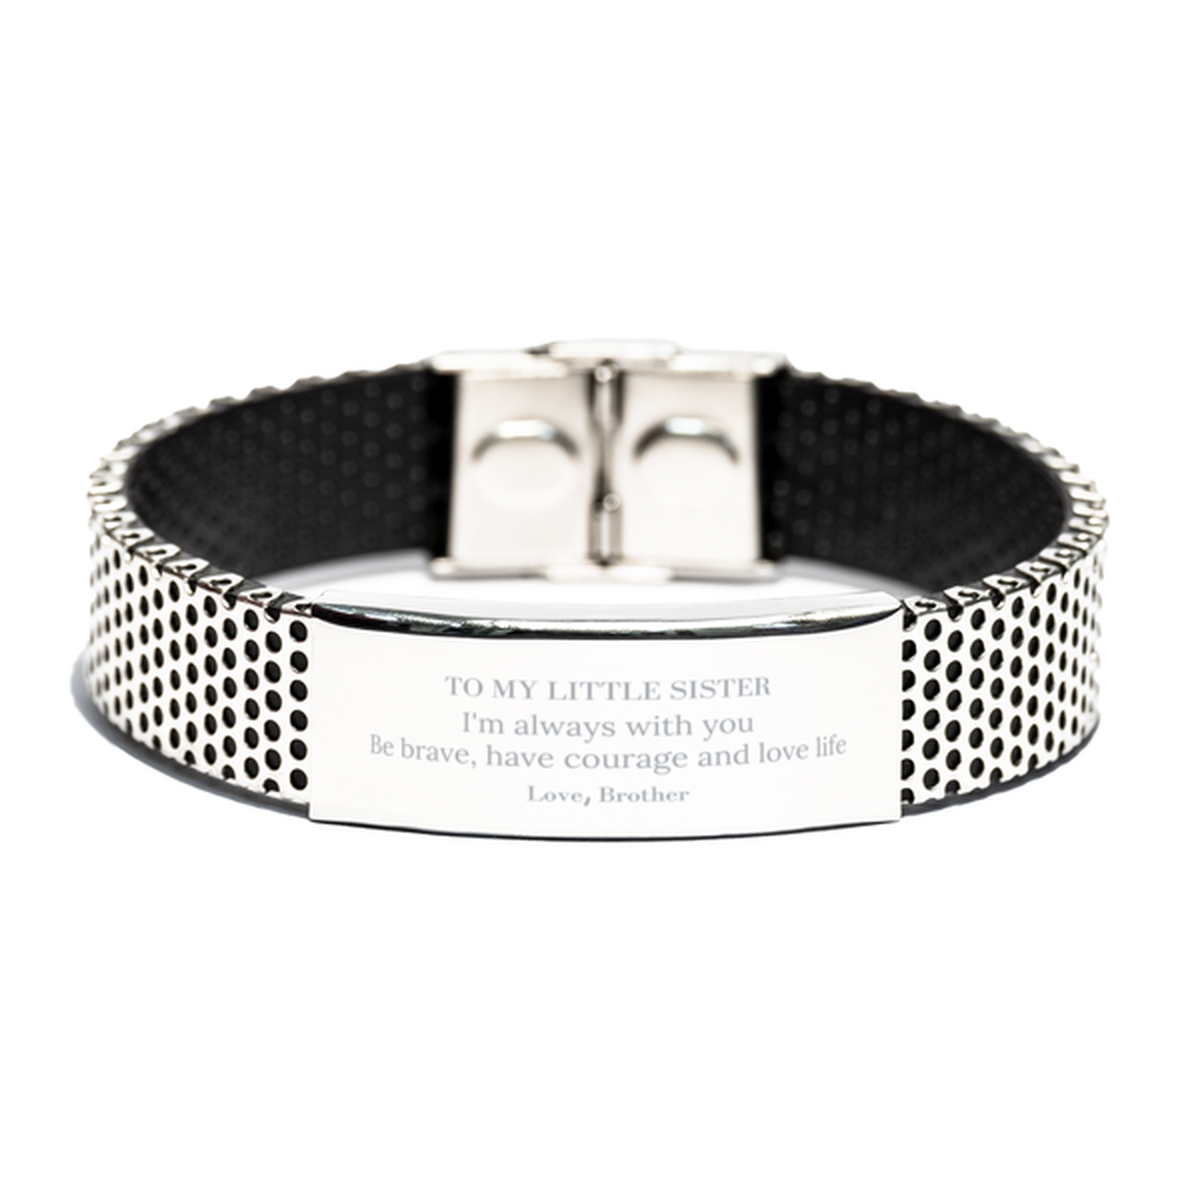 To My Little Sister Gifts from Brother, Unique Stainless Steel Bracelet Inspirational Christmas Birthday Graduation Gifts for Little Sister I'm always with you. Be brave, have courage and love life. Love, Brother